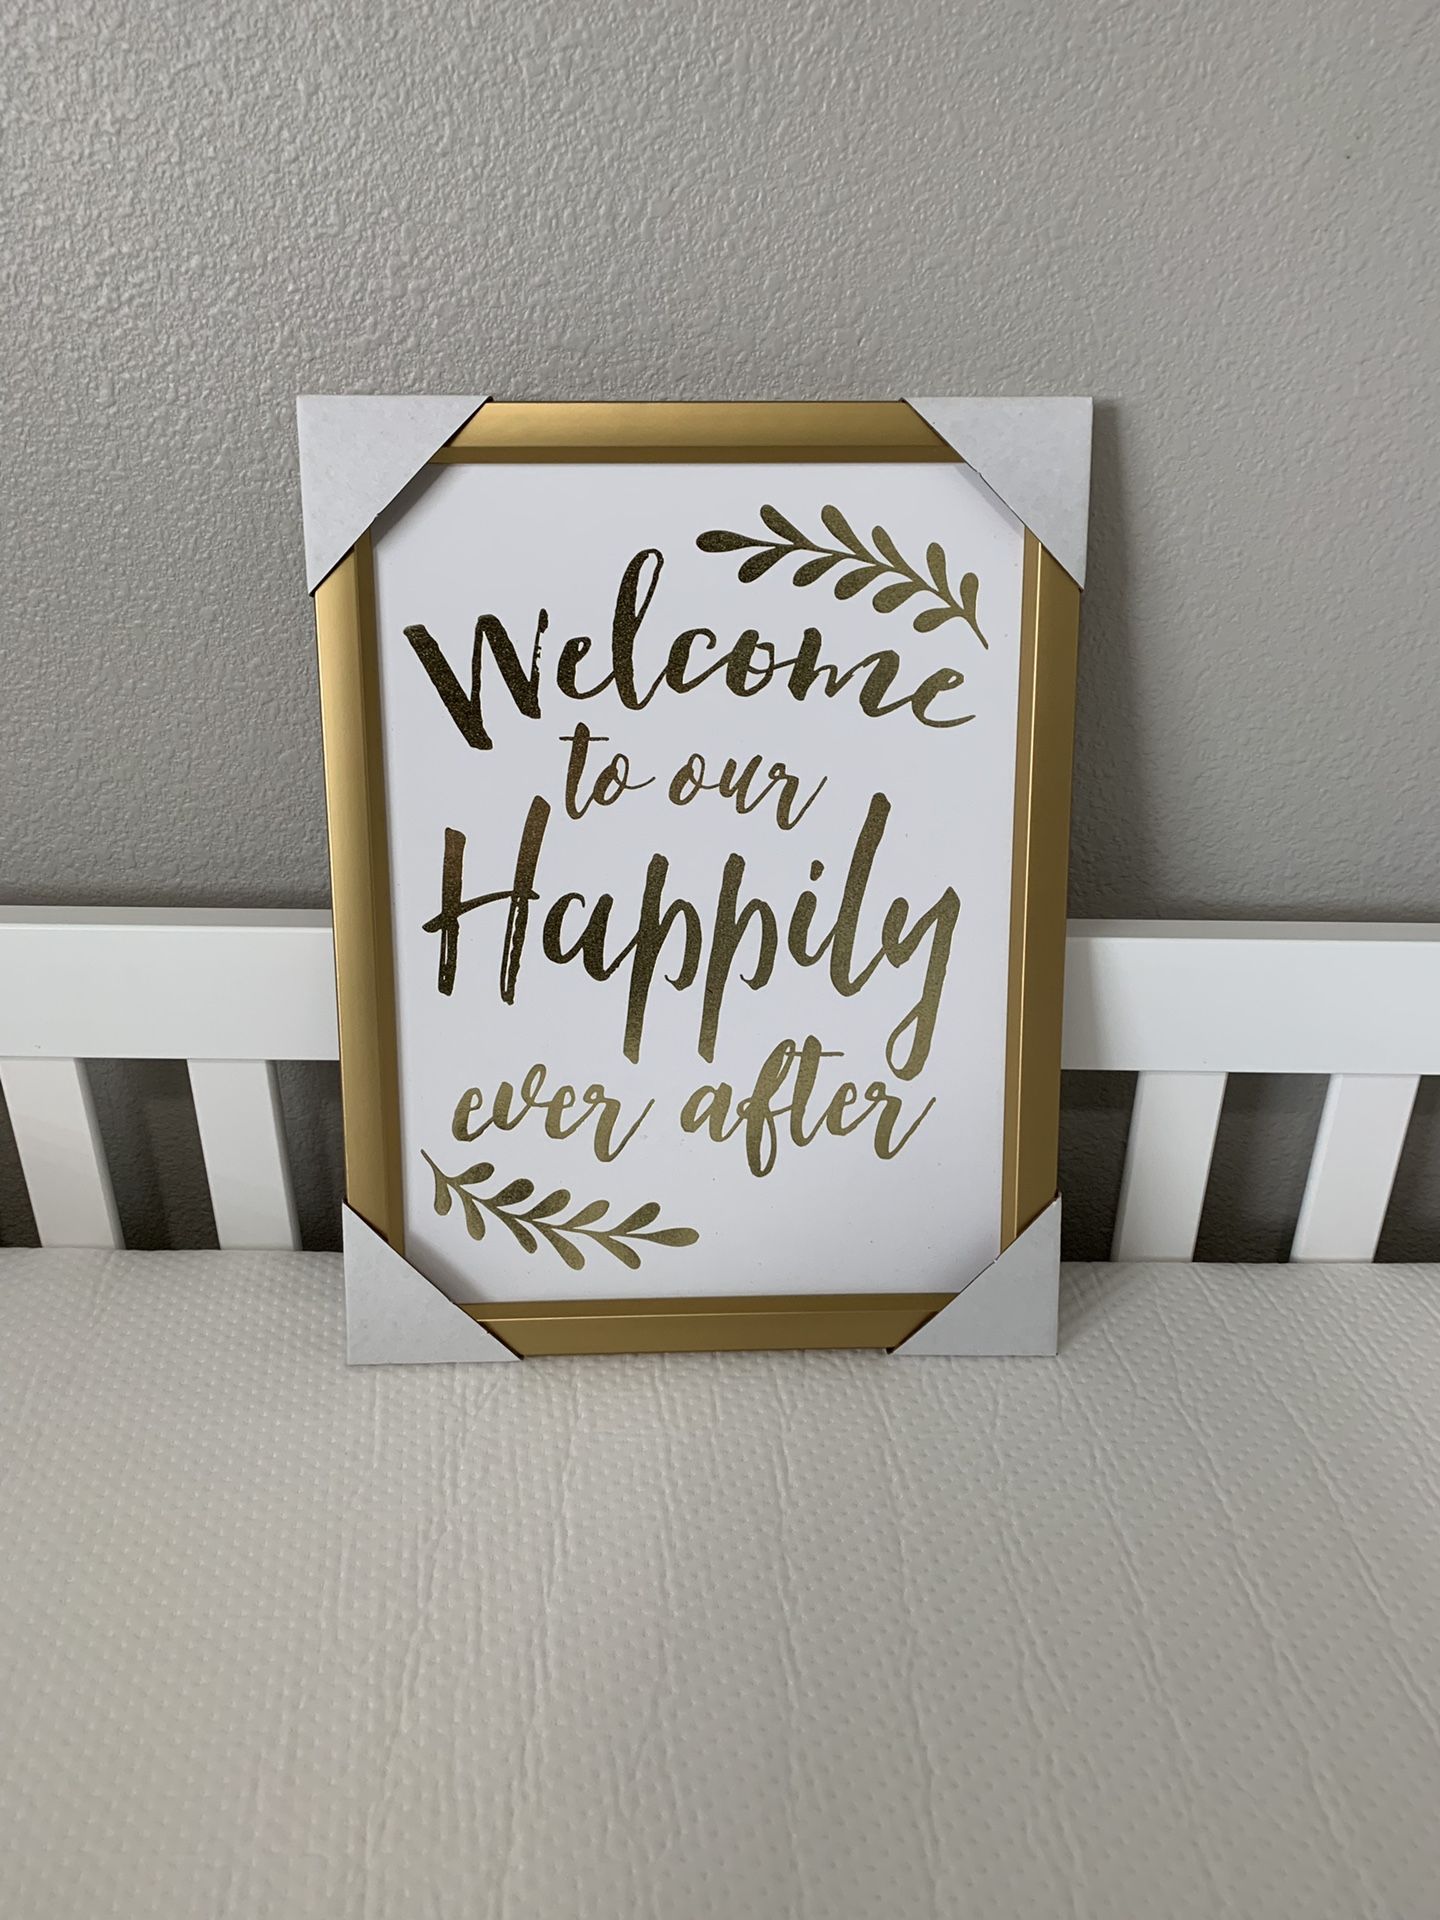 Happily ever after frame NEW